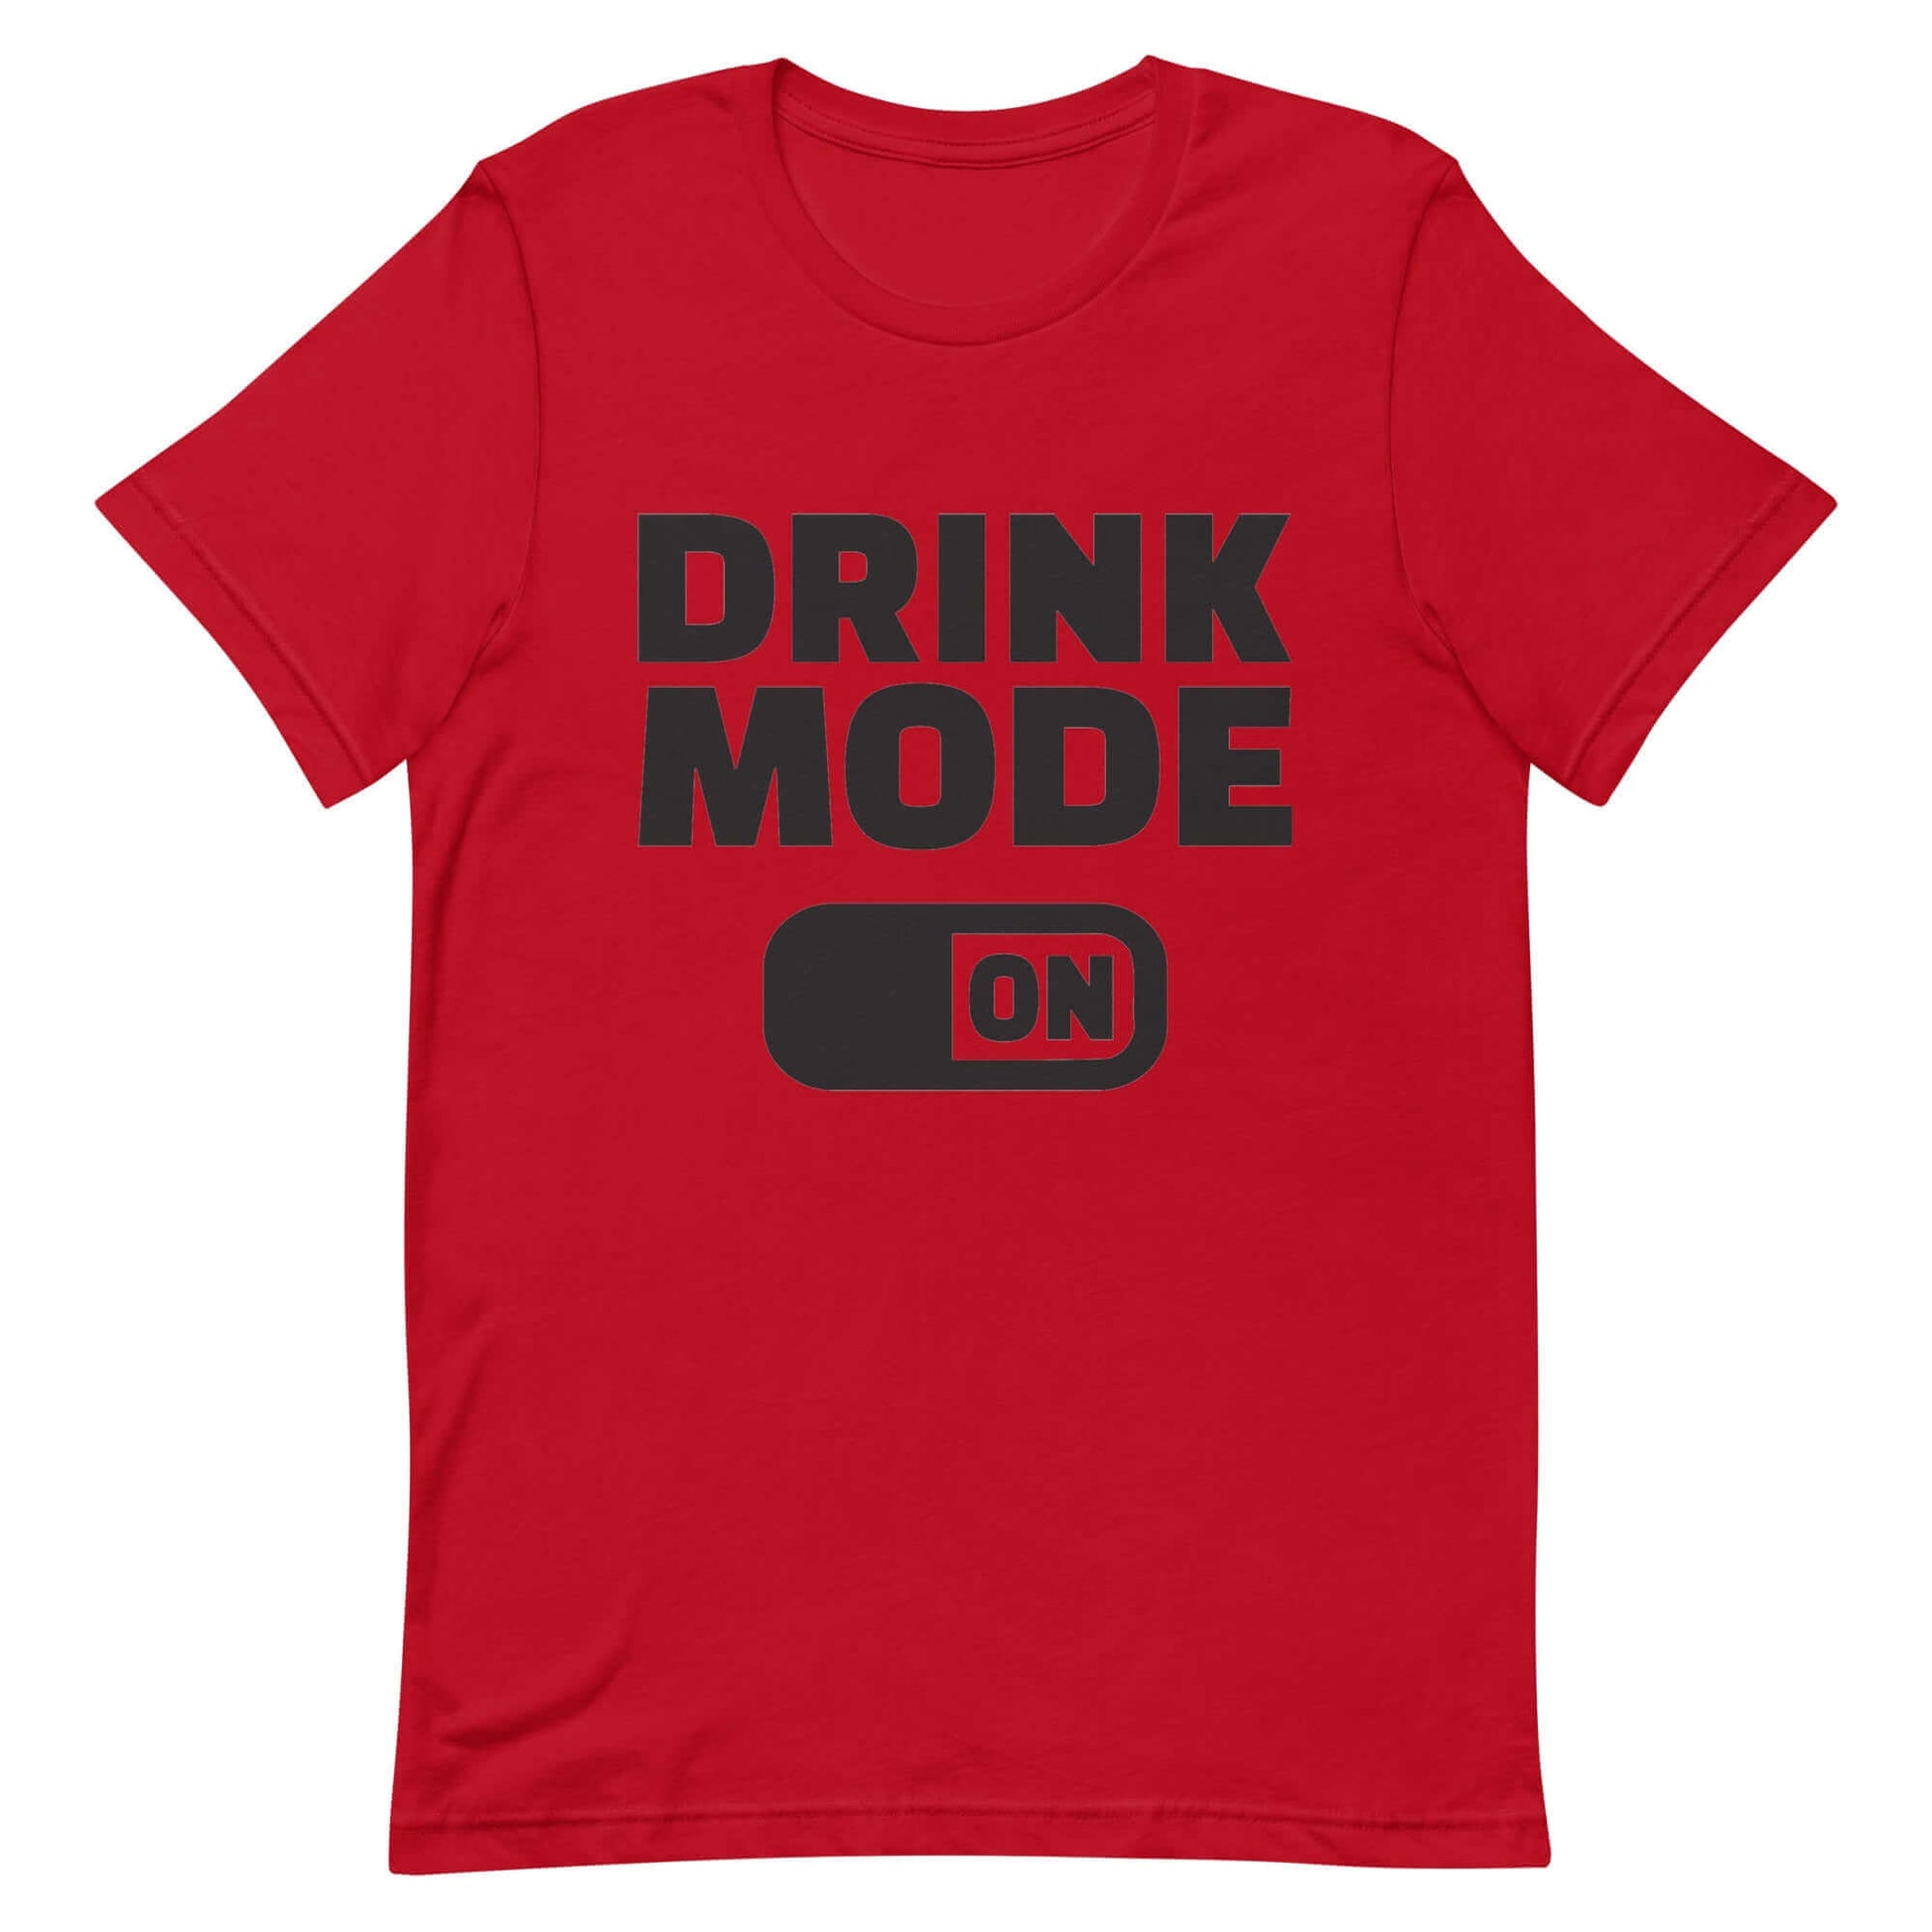 Drink Mode On - Unisex t-shirt Red